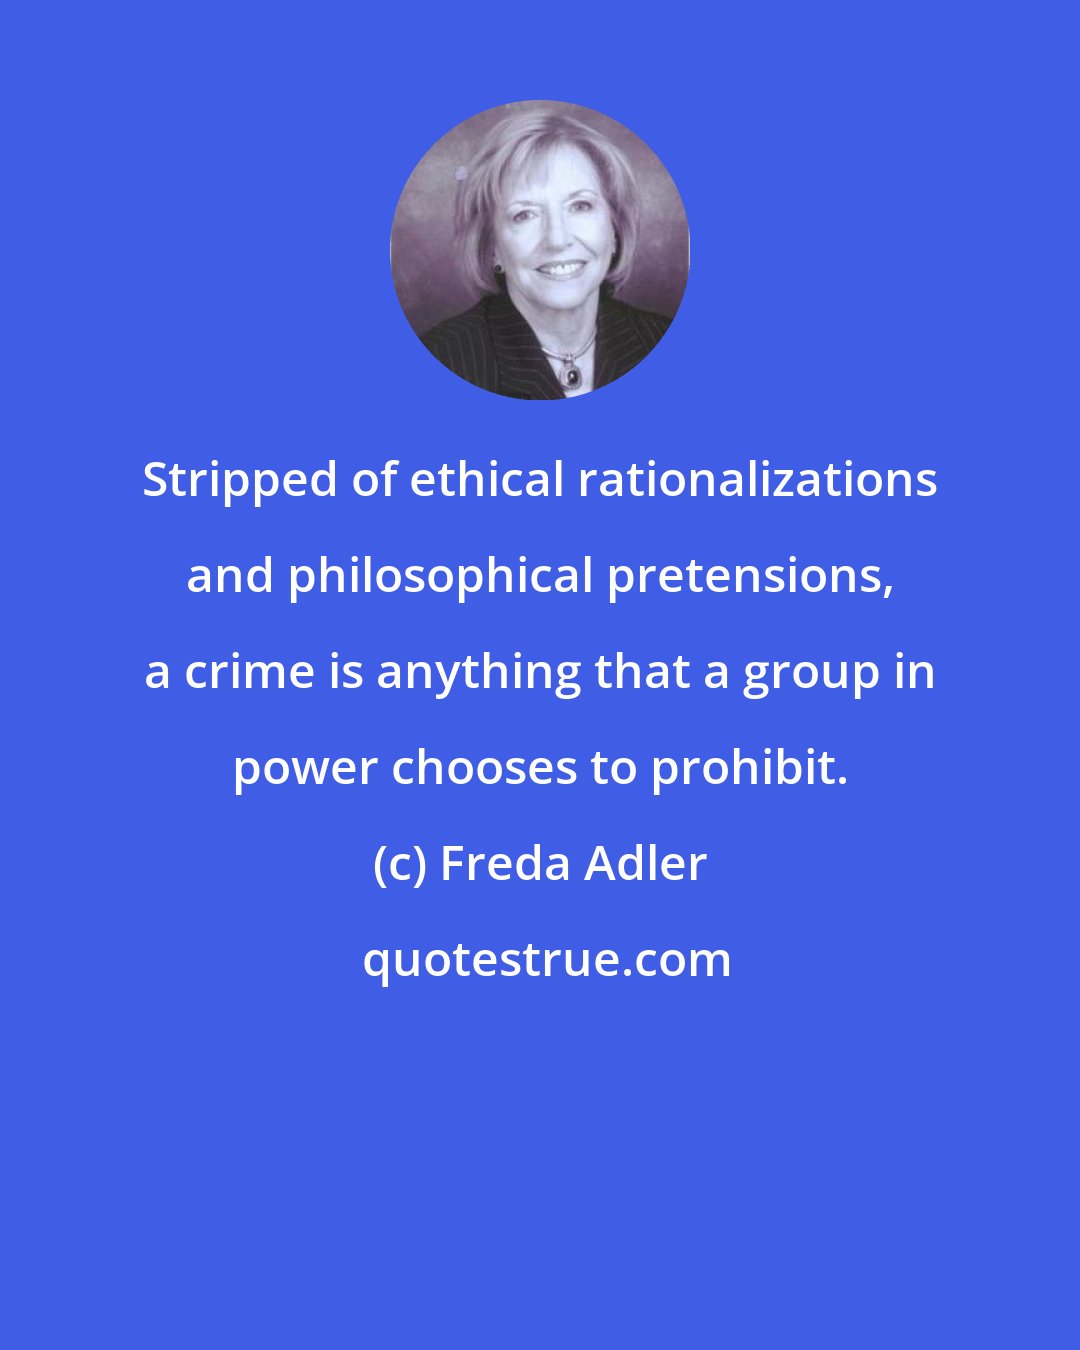 Freda Adler: Stripped of ethical rationalizations and philosophical pretensions, a crime is anything that a group in power chooses to prohibit.